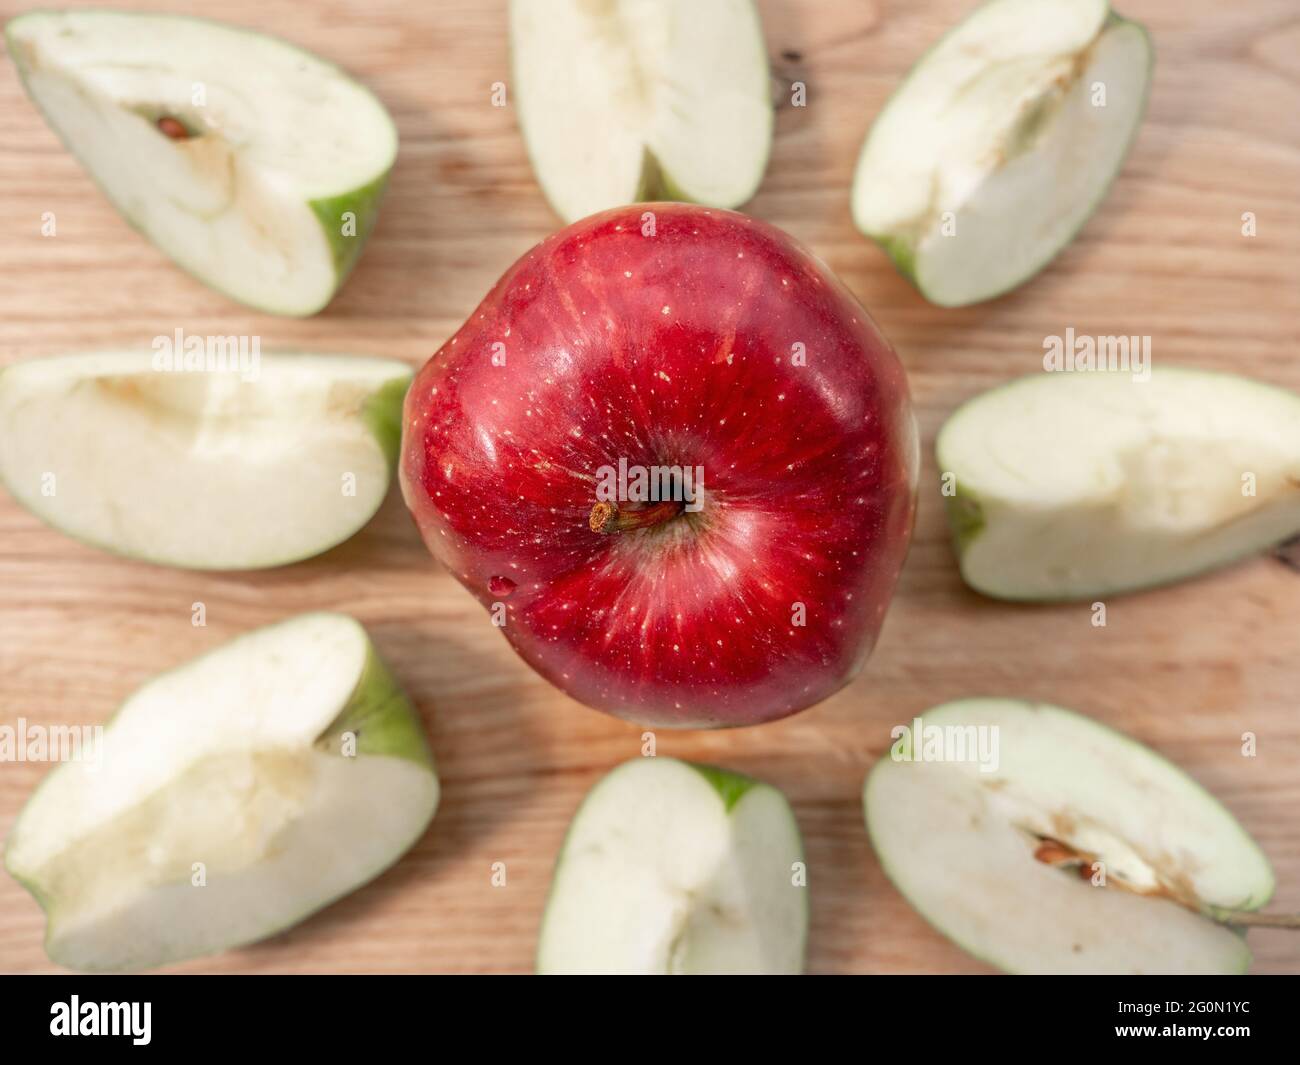 Fresh juicy red apple in a center of light wooden chopping board. Eight quarters of green apple form a circle around red apple. Healthy eating concept Stock Photo